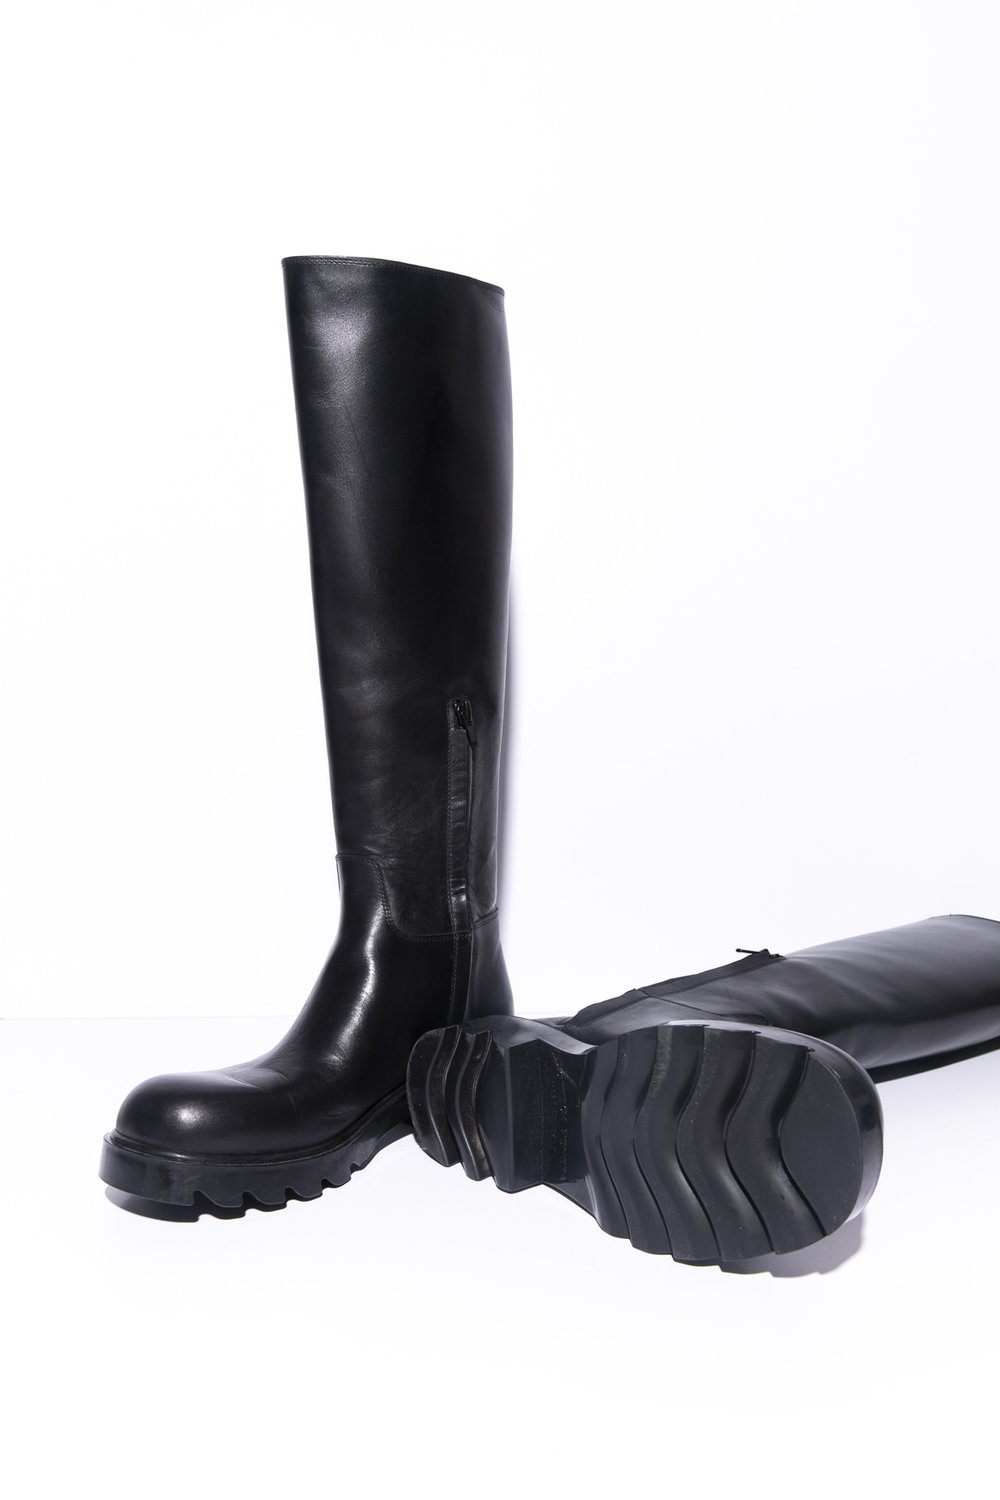 Louis Vuitton Size 35 Rare Black Suede Over the Knee Boots Moto Motorc –  Bagriculture